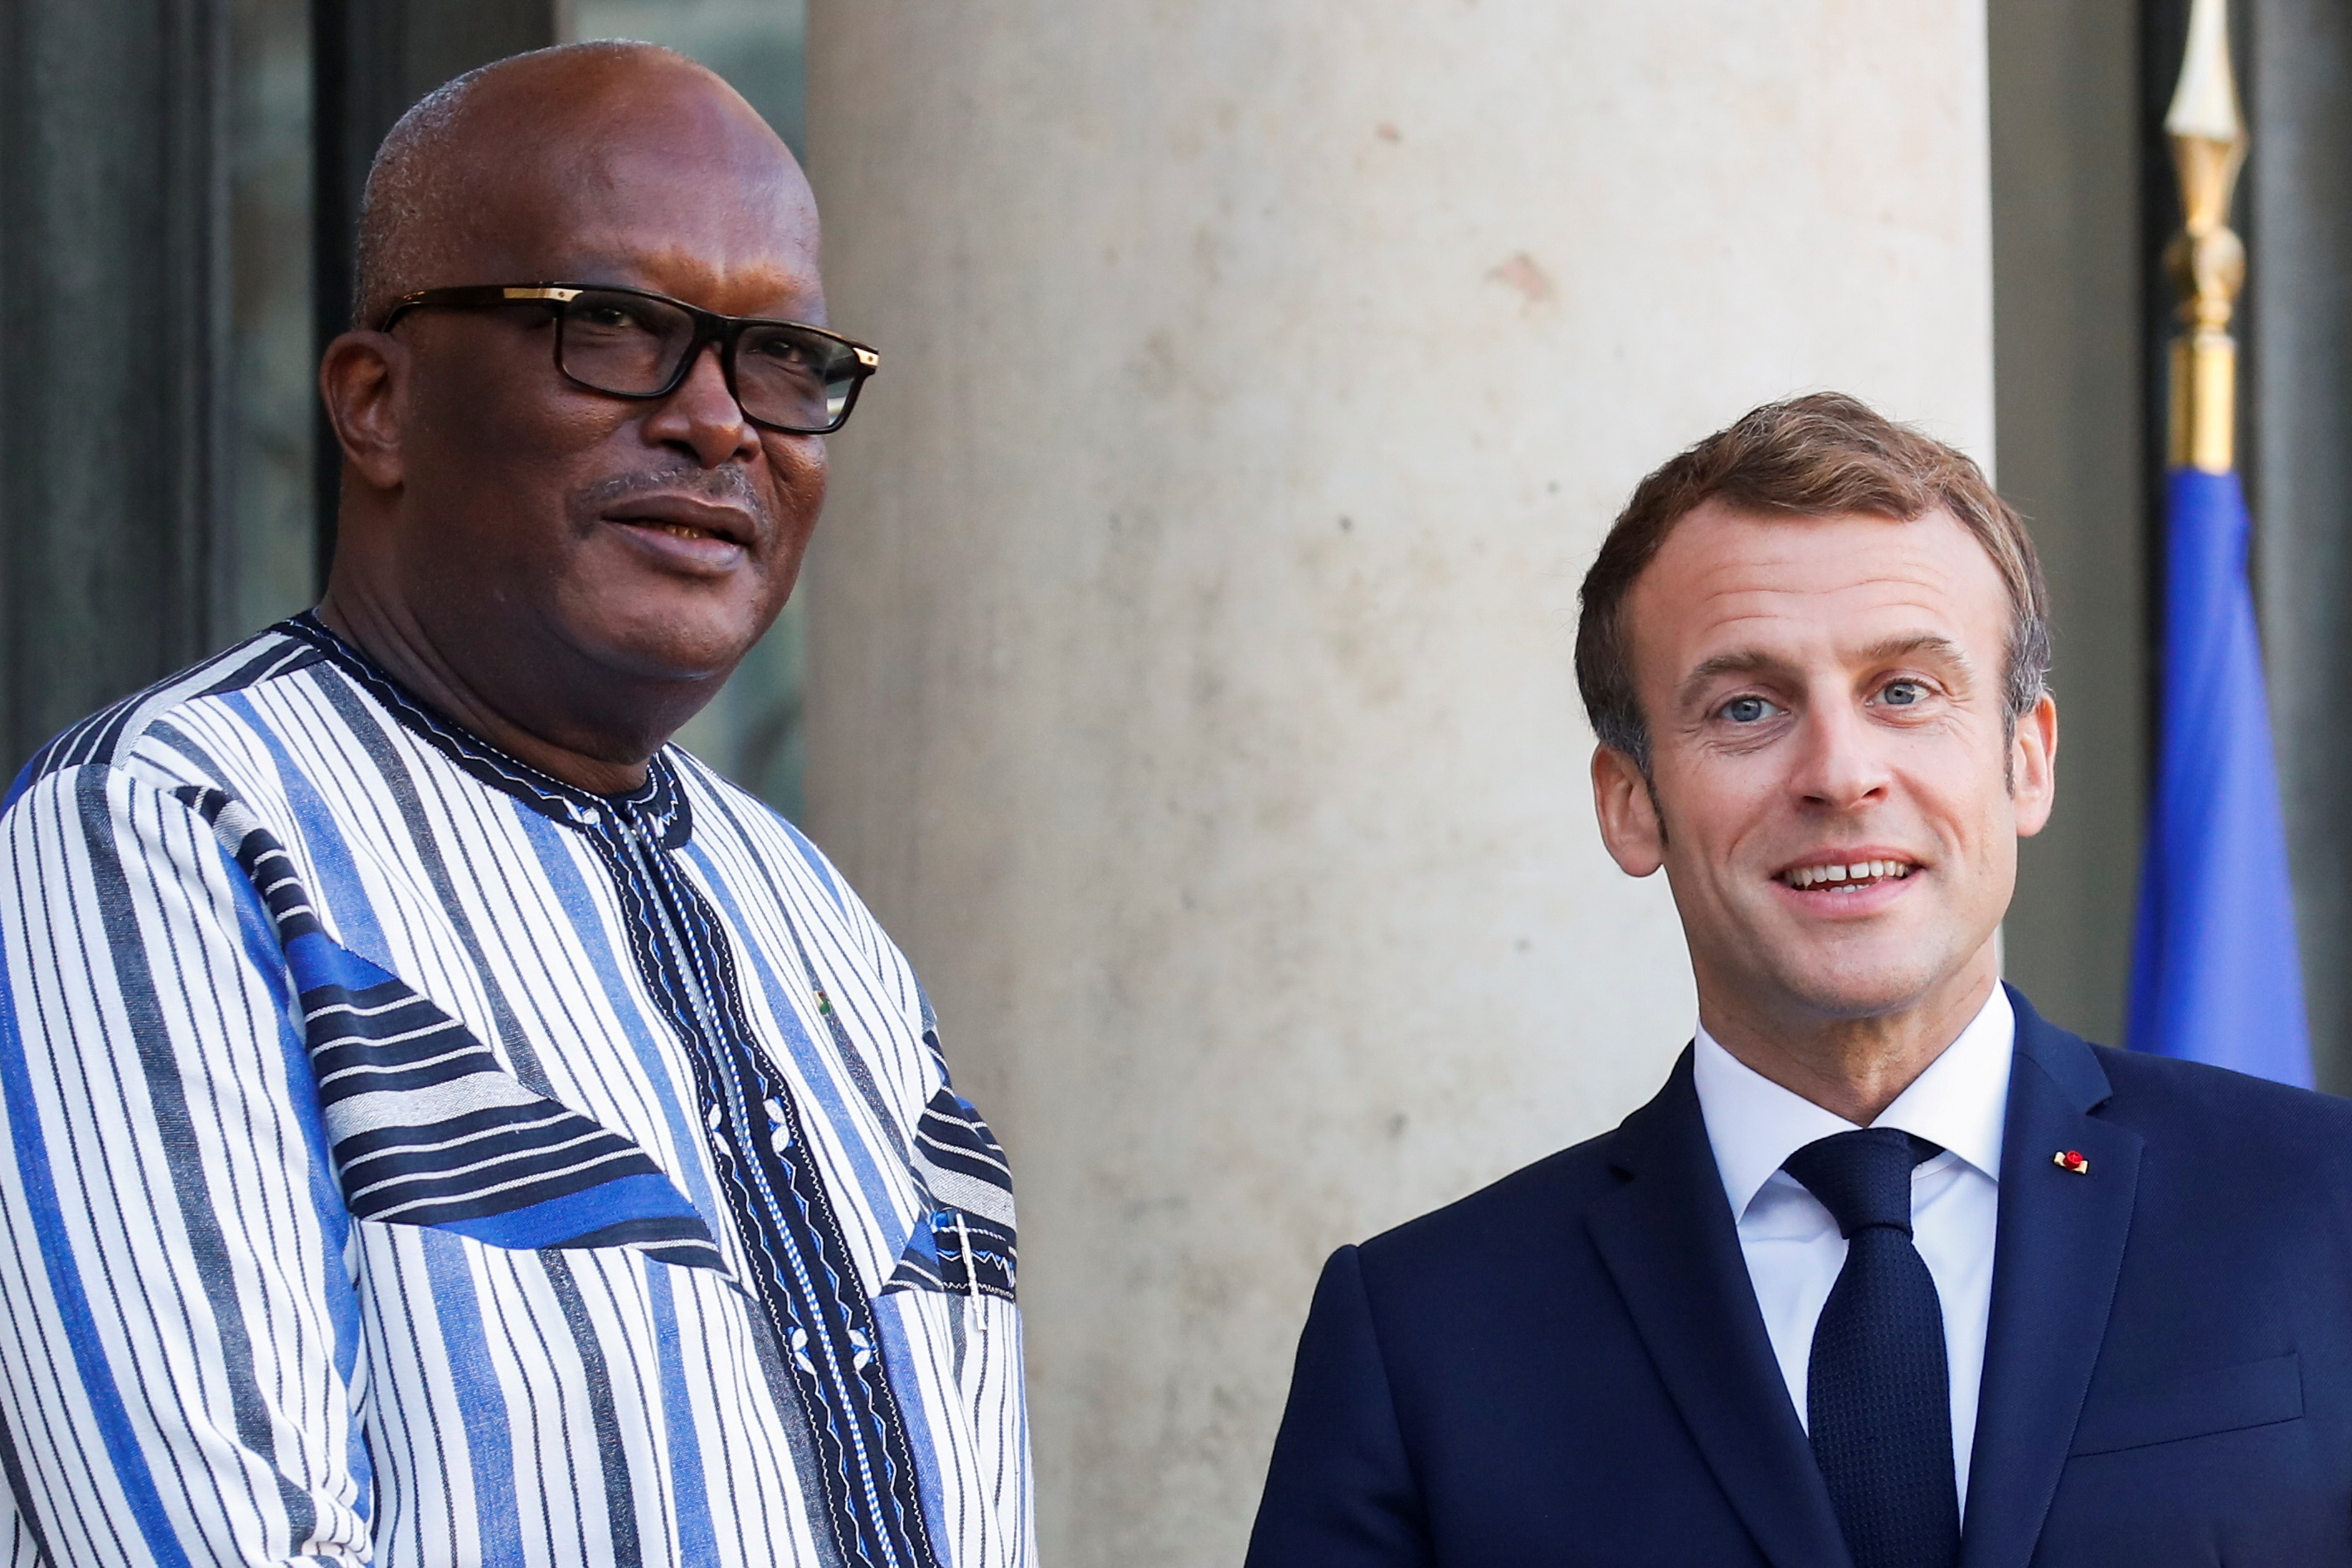 French President Emmanuel Macron welcomes Burkina Faso's President Roch Marc Christian Kabore before a meeting over security in the Sahel region at the Elysee Palace in Paris, France, November 12, 2021. REUTERS/Gonzalo Fuentes/File Photo